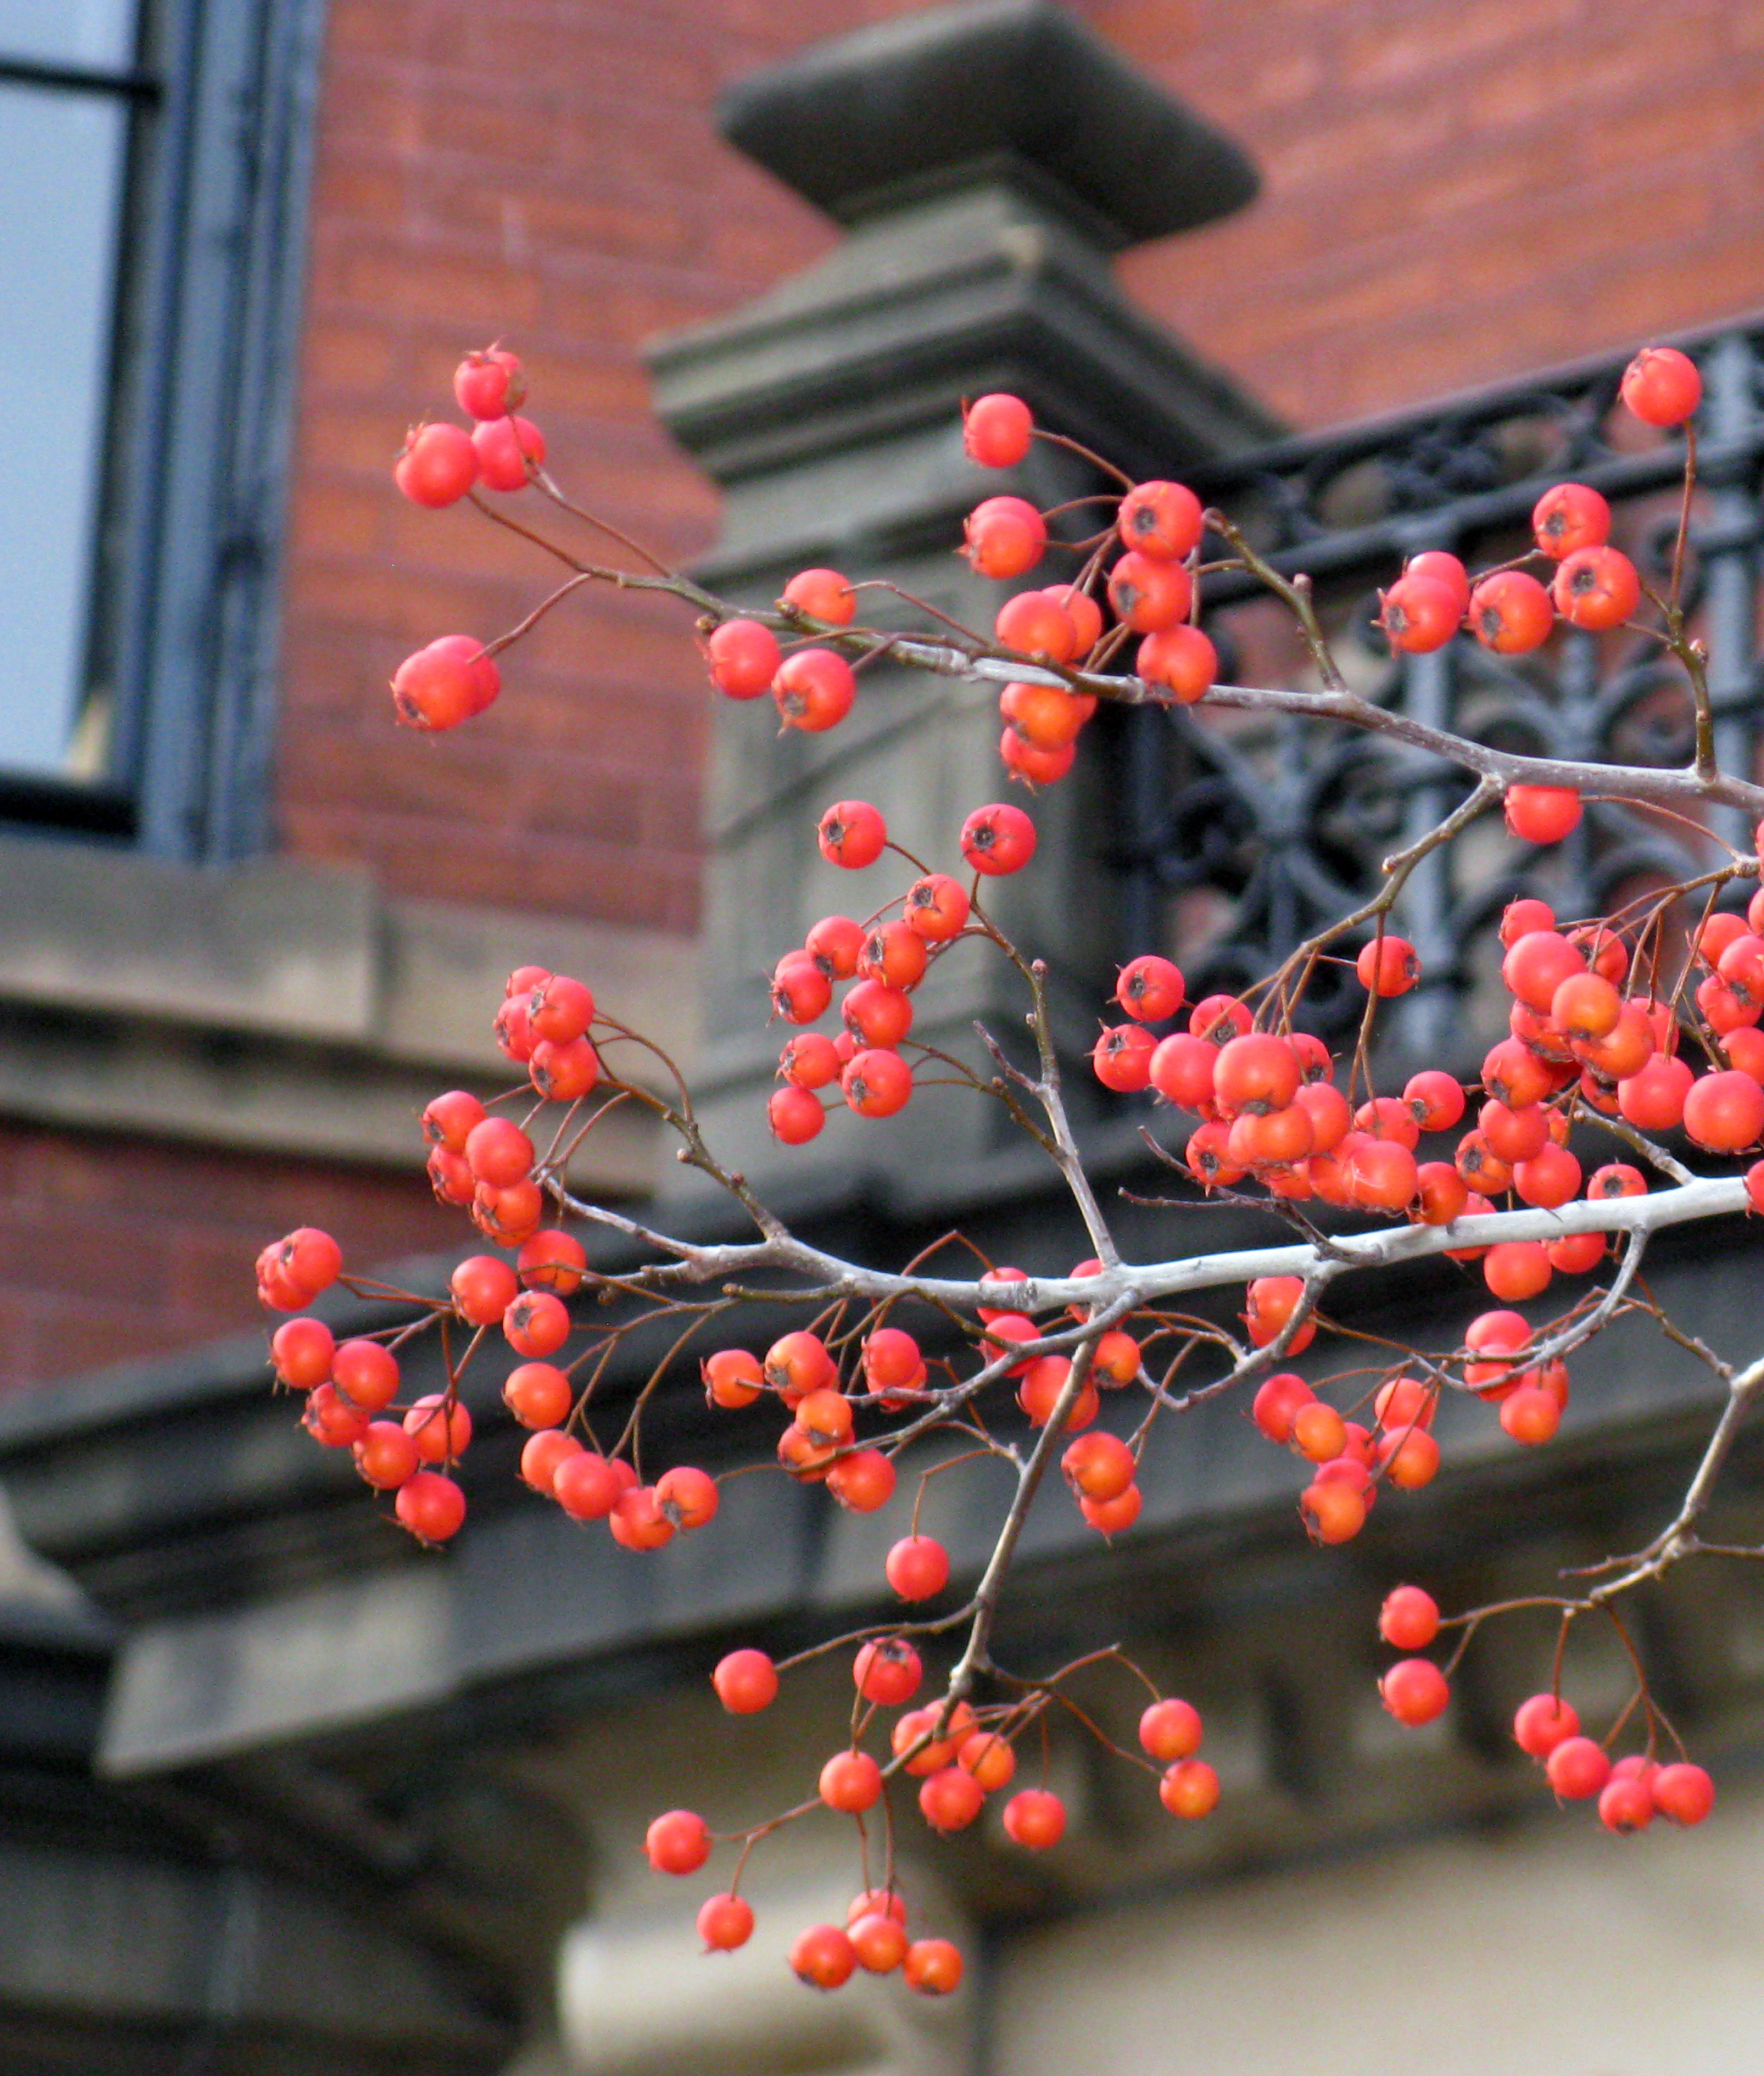 More Berries In The Back Bay (user submitted)